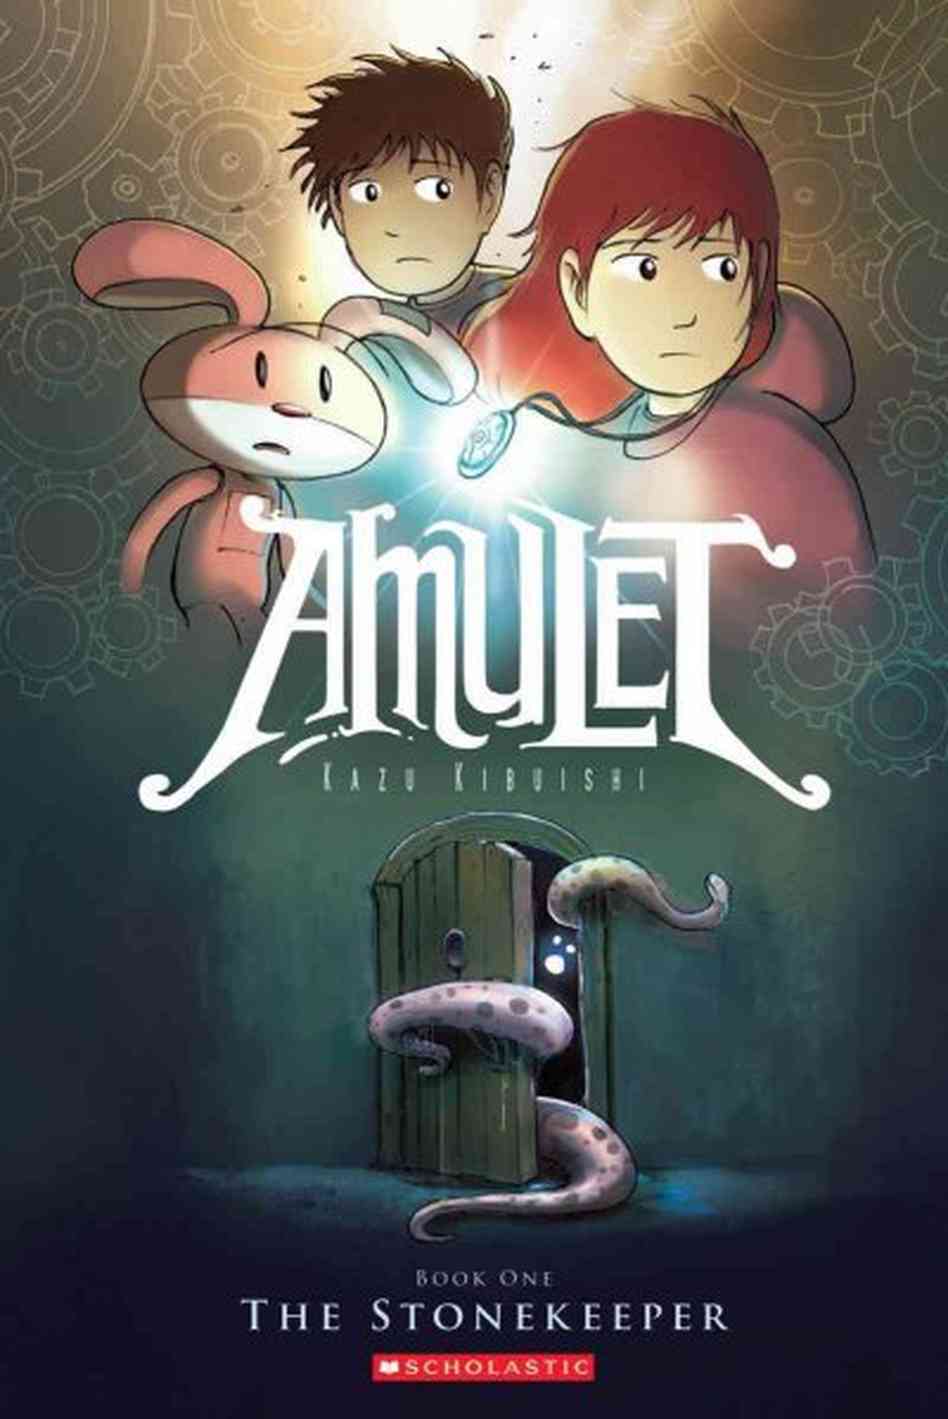 Cover of the first book in the Amulet series, The Stonekeeper